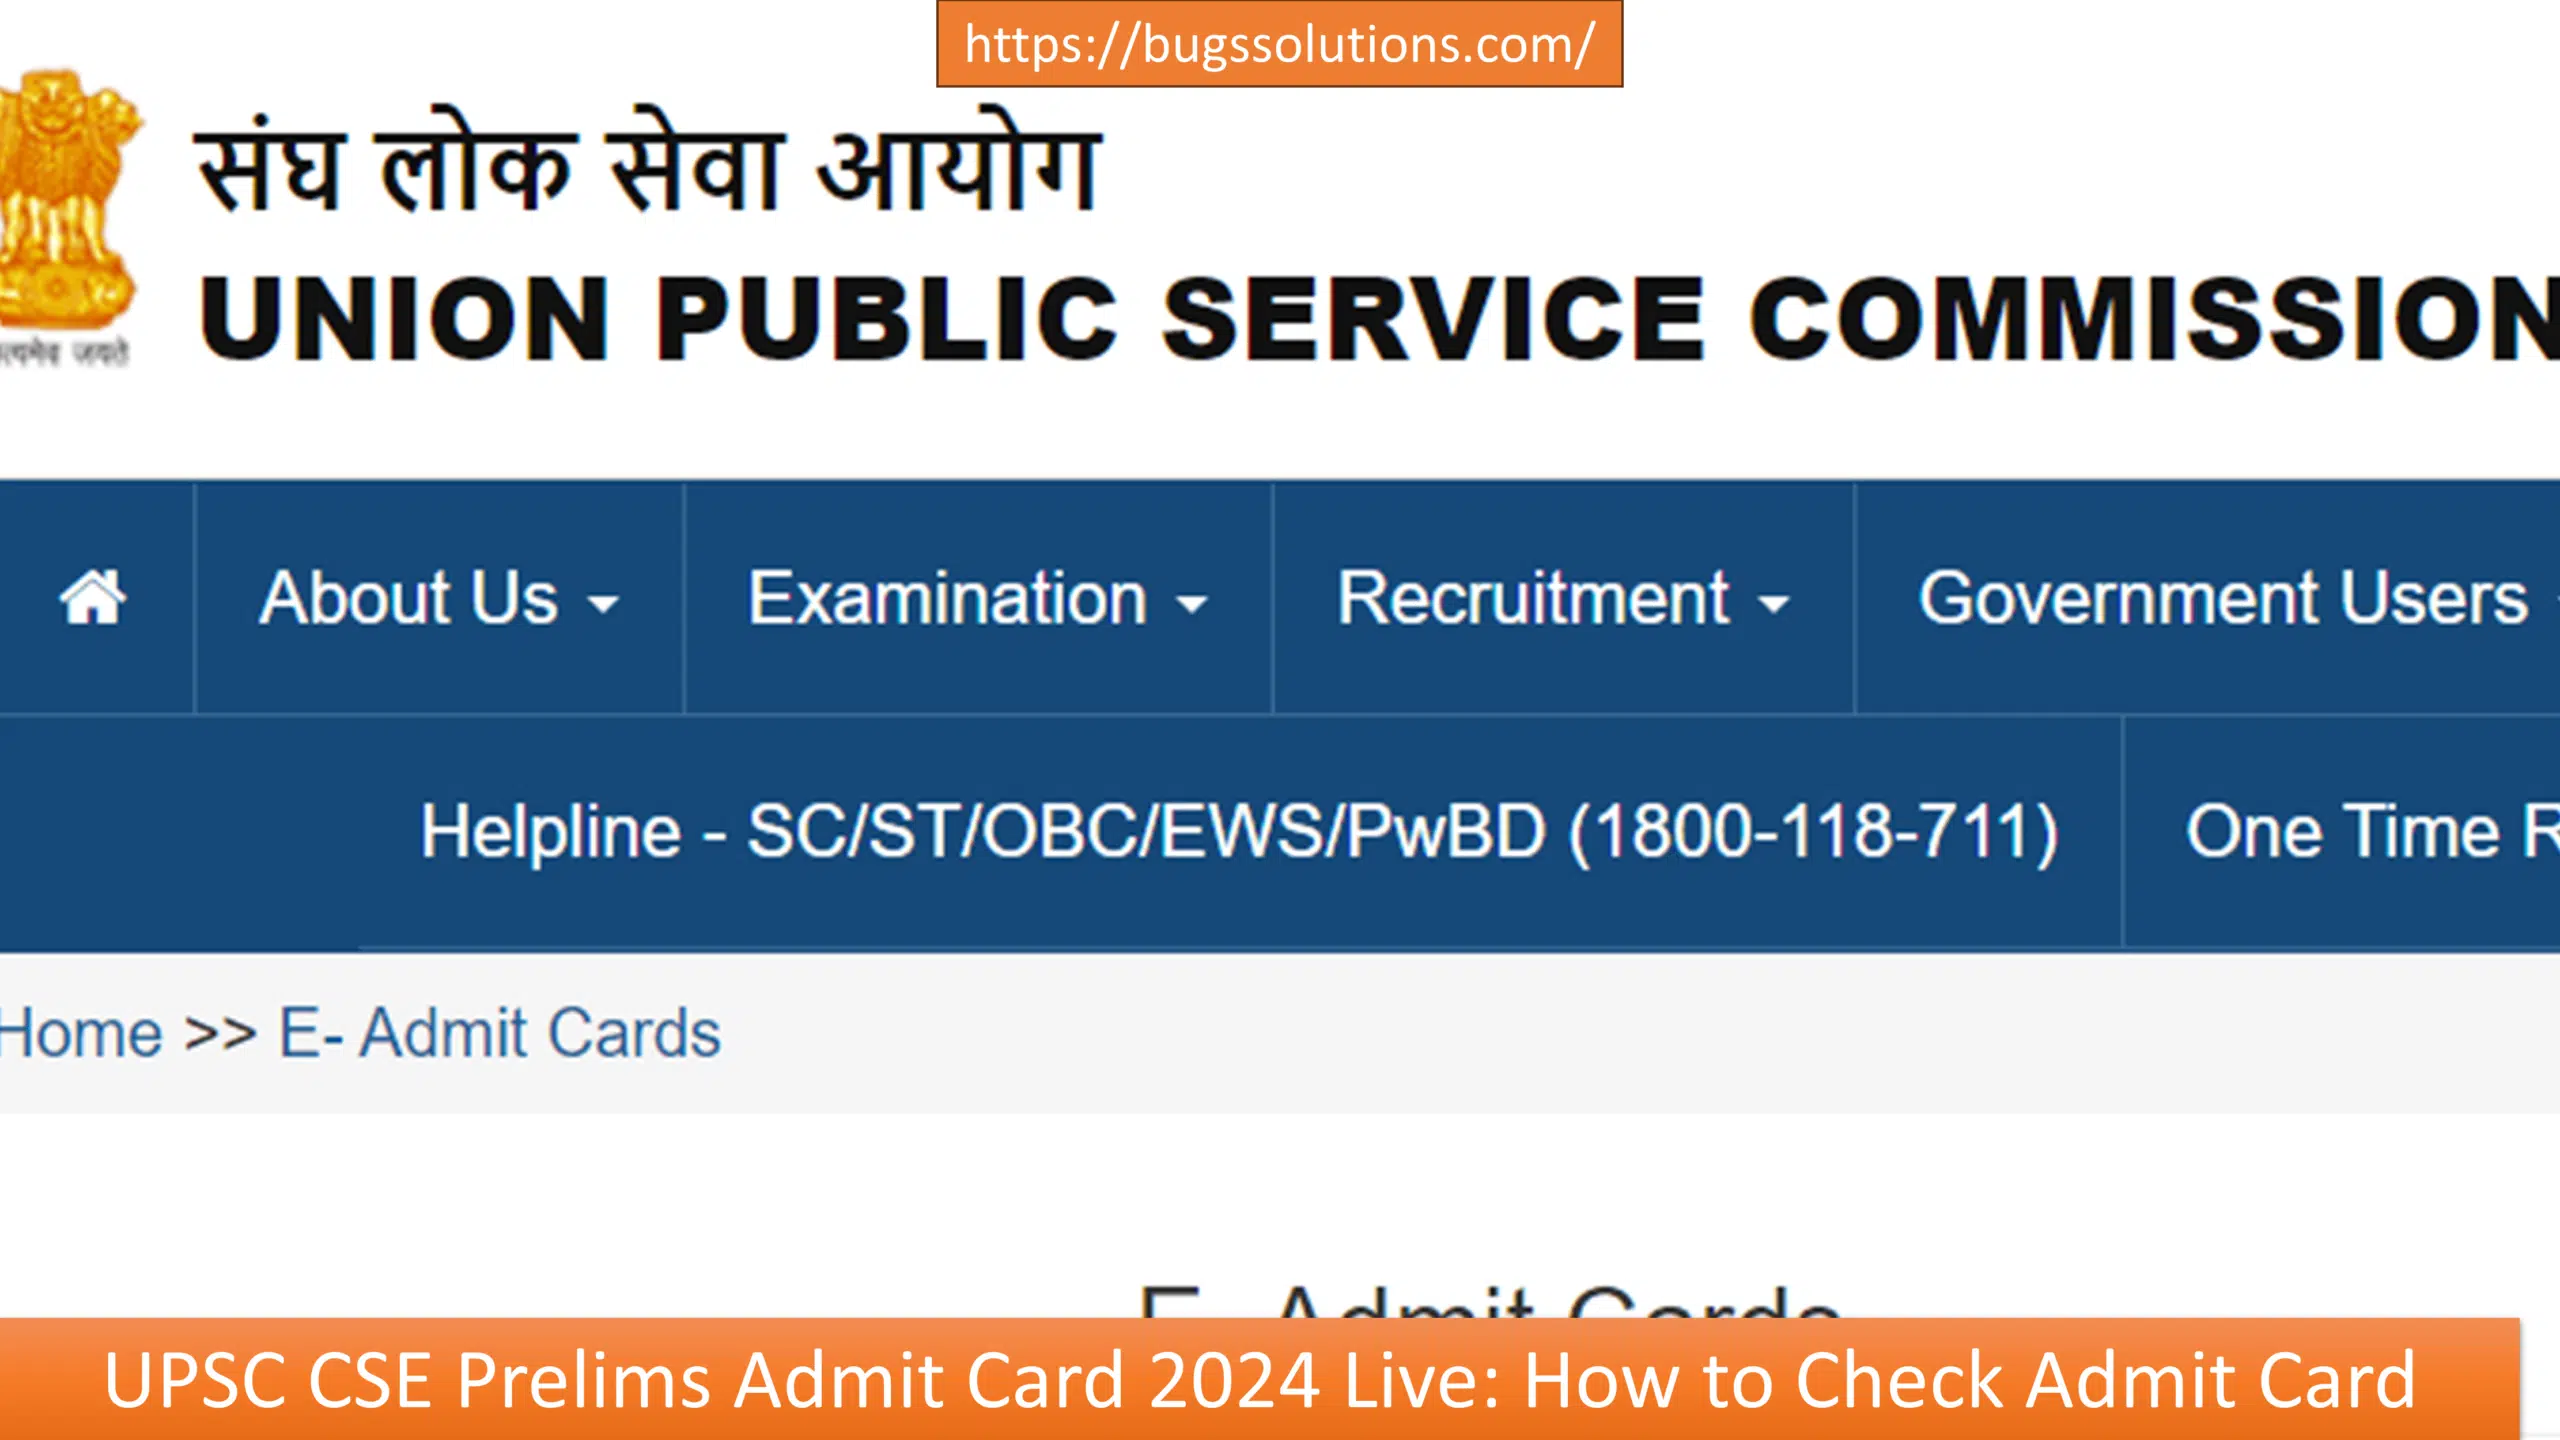 UPSC CSE Prelims Admit Card 2024 Live: How to Check Admit Card